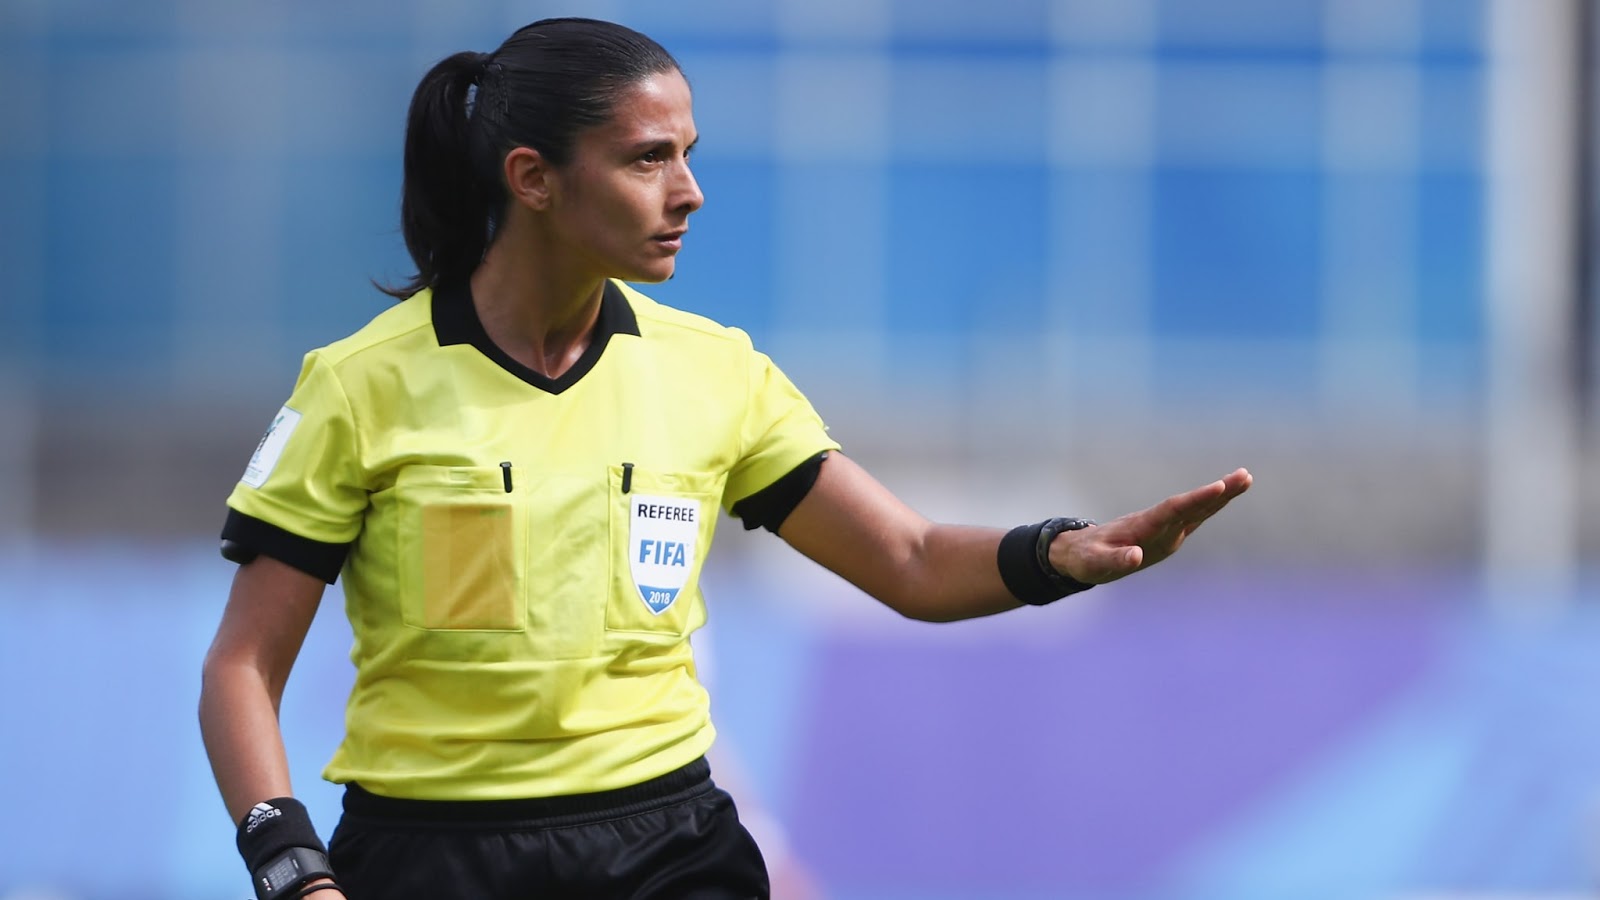 Umpierrez: "I would love to see more women refereeing men's footb...